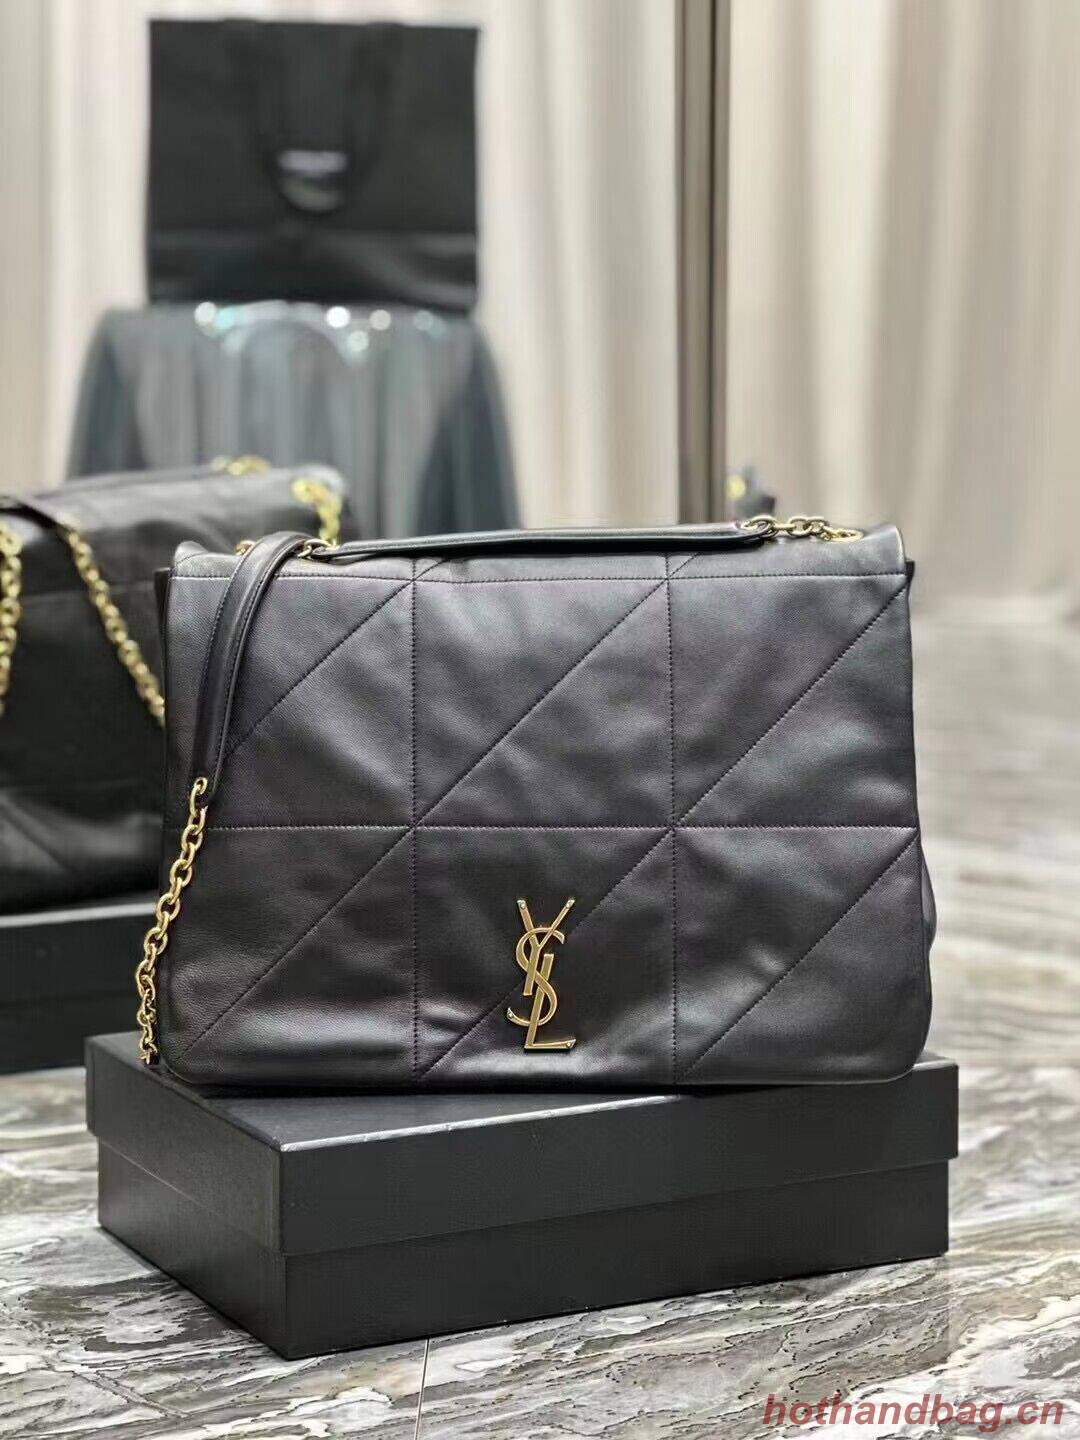 SAINT LAURENT KATE MEDIUM REVERSIBLE CHAIN BAG IN SUEDE AND SMOOTH LEATHER Y855822 black